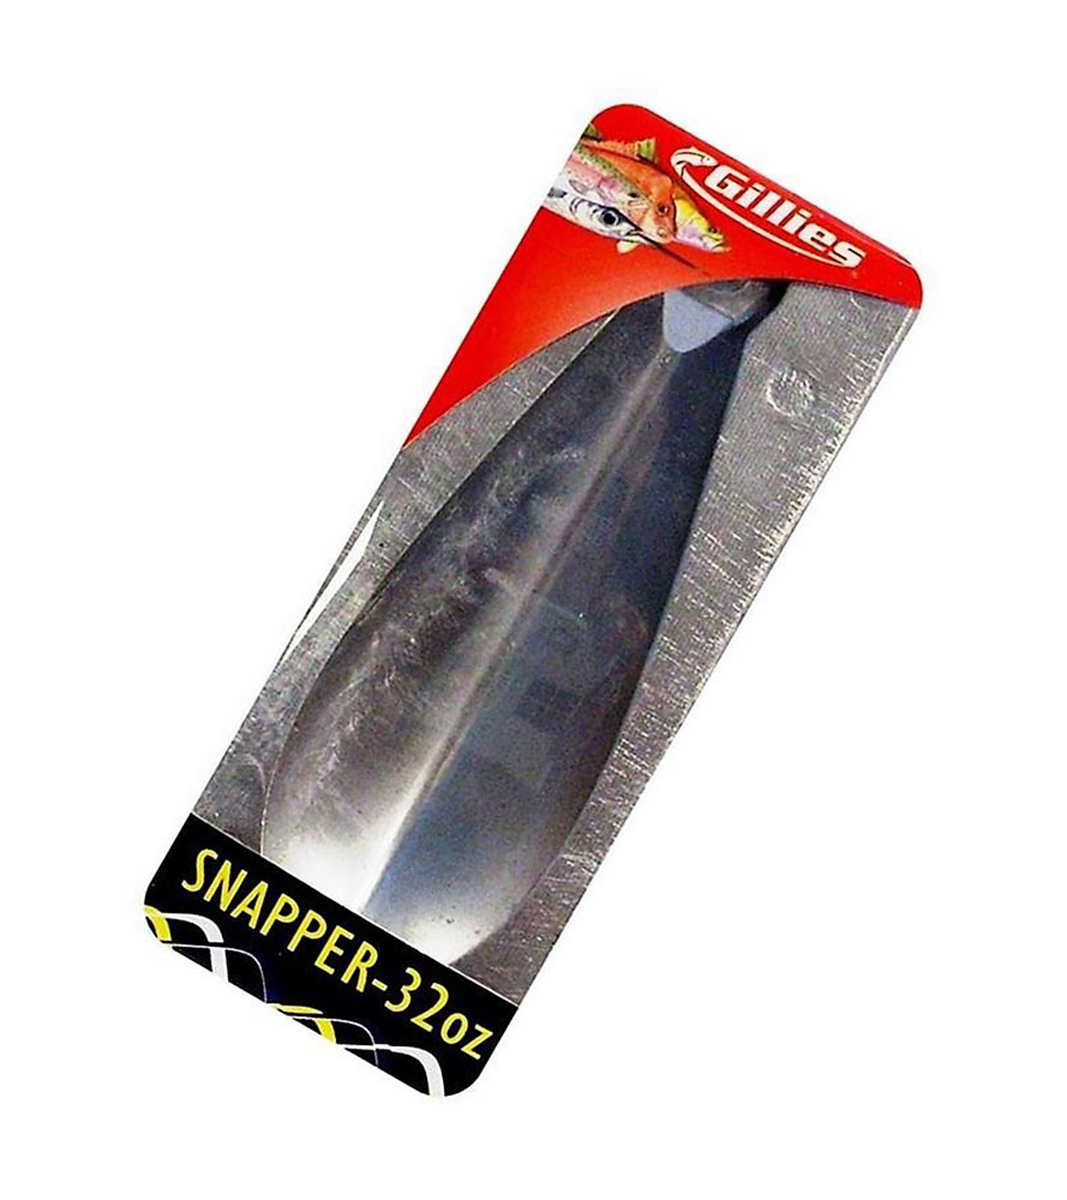 Gillies 32oz Snapper Sinker Mould - Makes 1 Snapper Sinkers at a Time